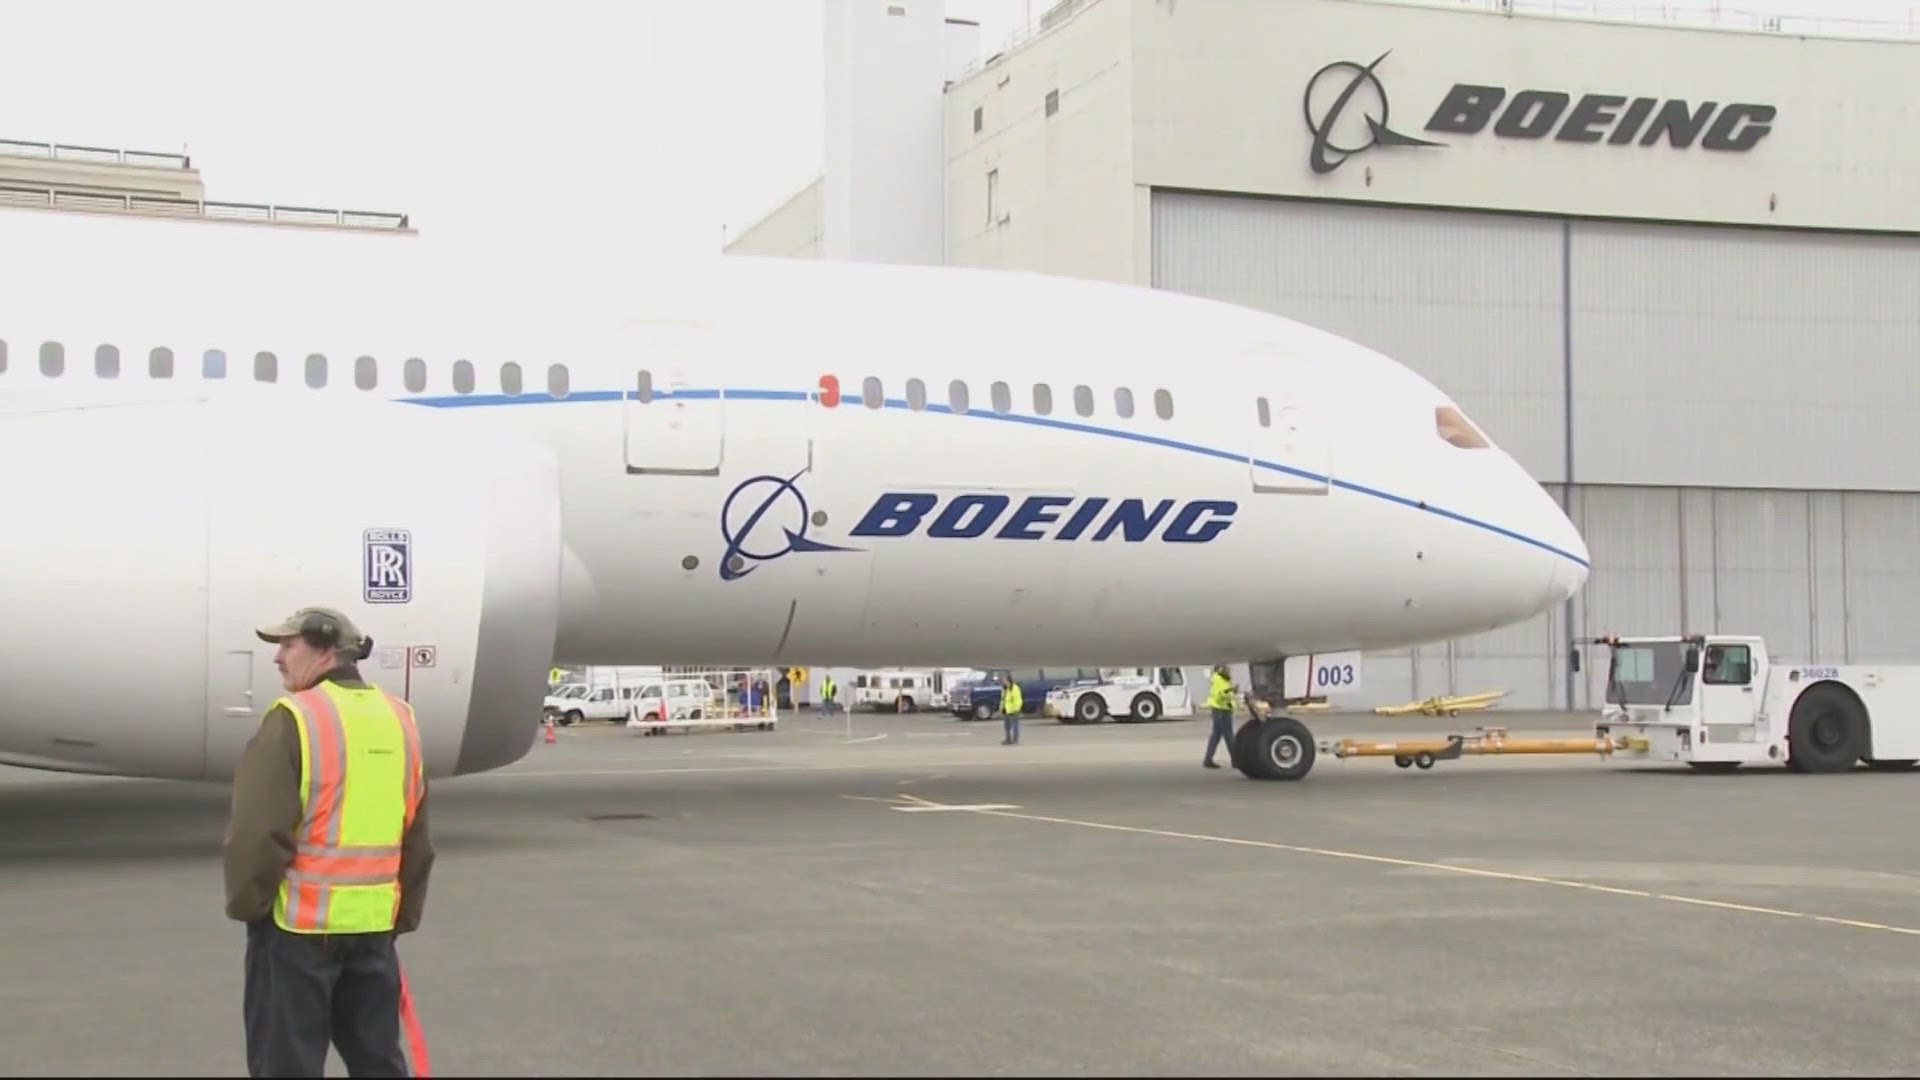 Boeing will have until the end of the coming week to accept or reject the offer.